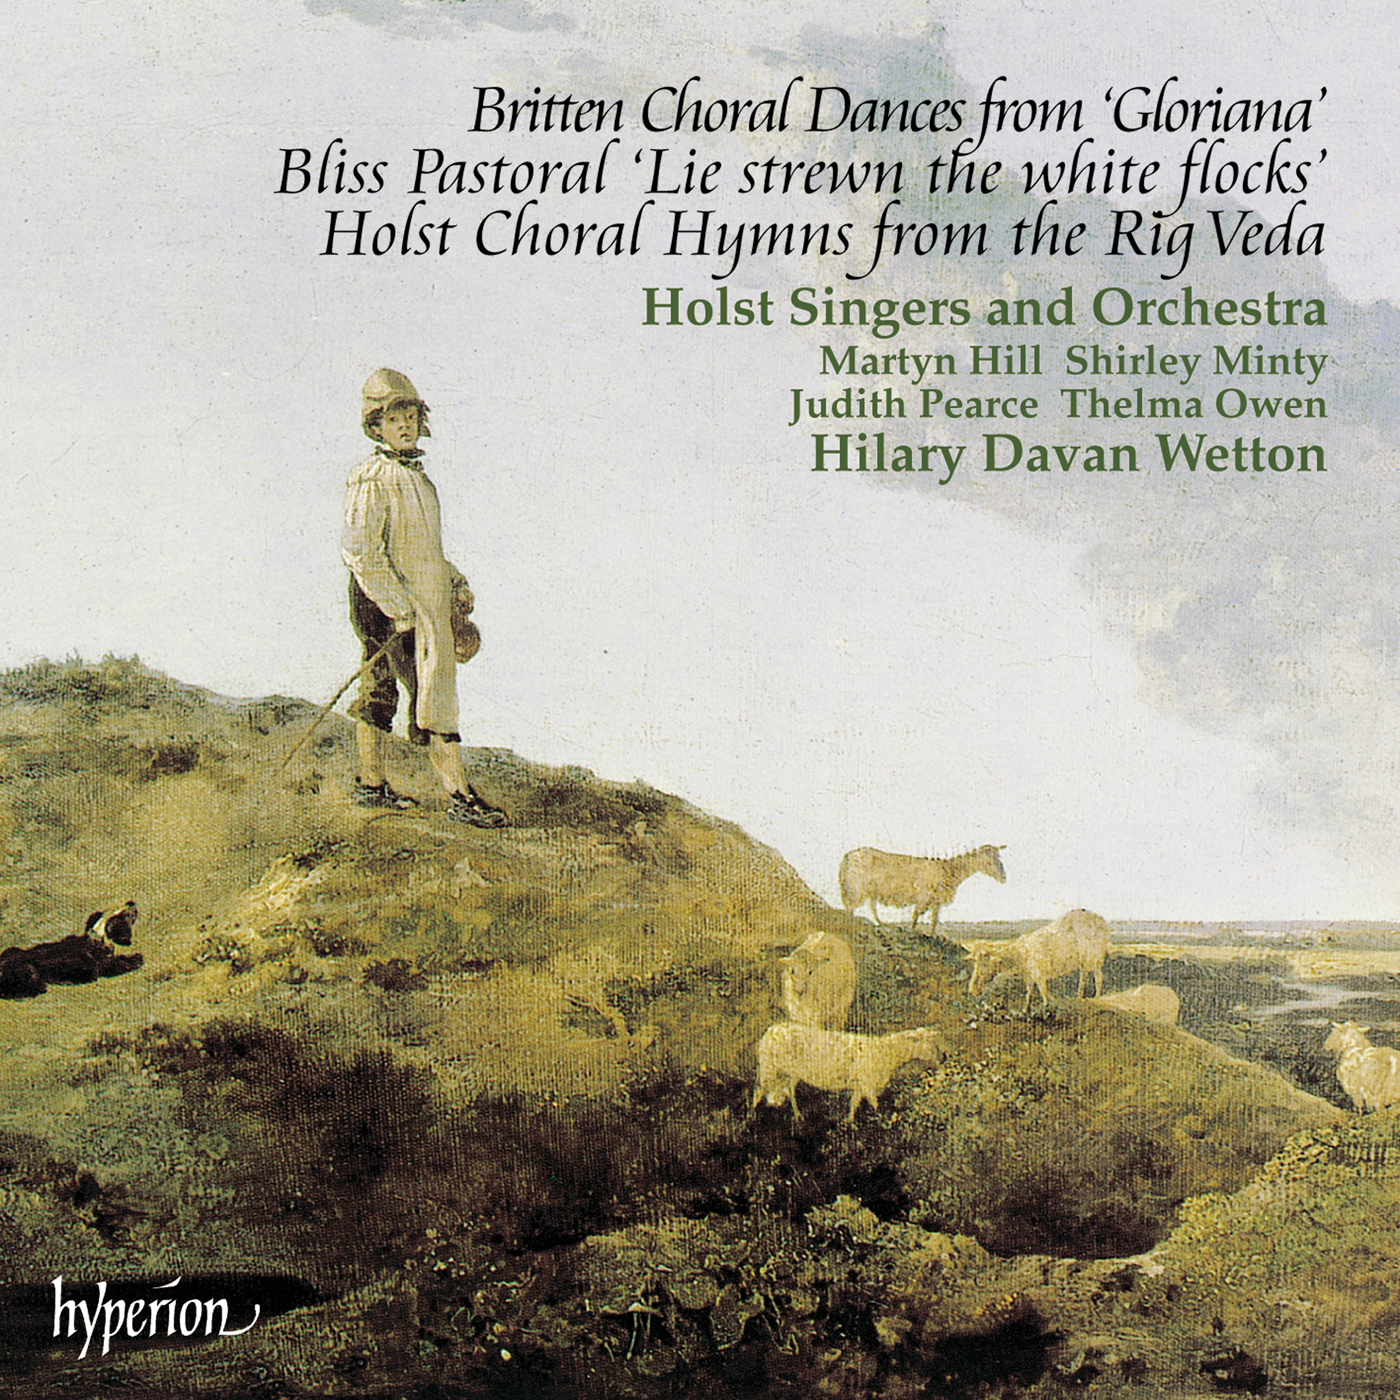 Britten: Choral dances from Gloriana; Bliss: Pastoral 'Lie strewn the white flocks'; Holst: Choral Hymns from the Rig Veda